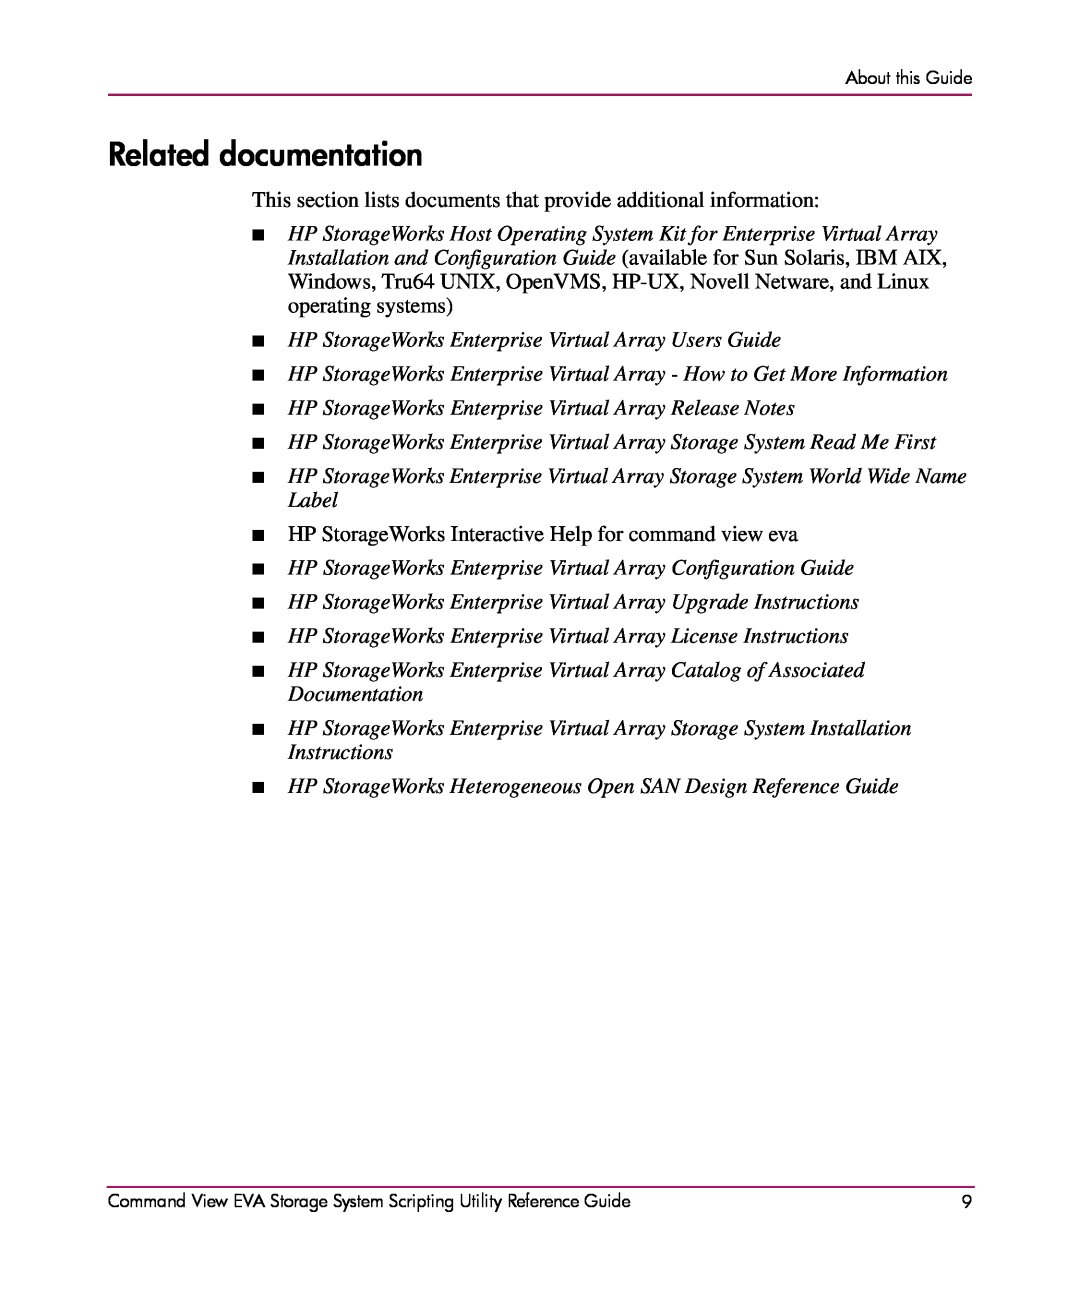 XM Satellite Radio AA-RU5HC-TE Related documentation, This section lists documents that provide additional information 